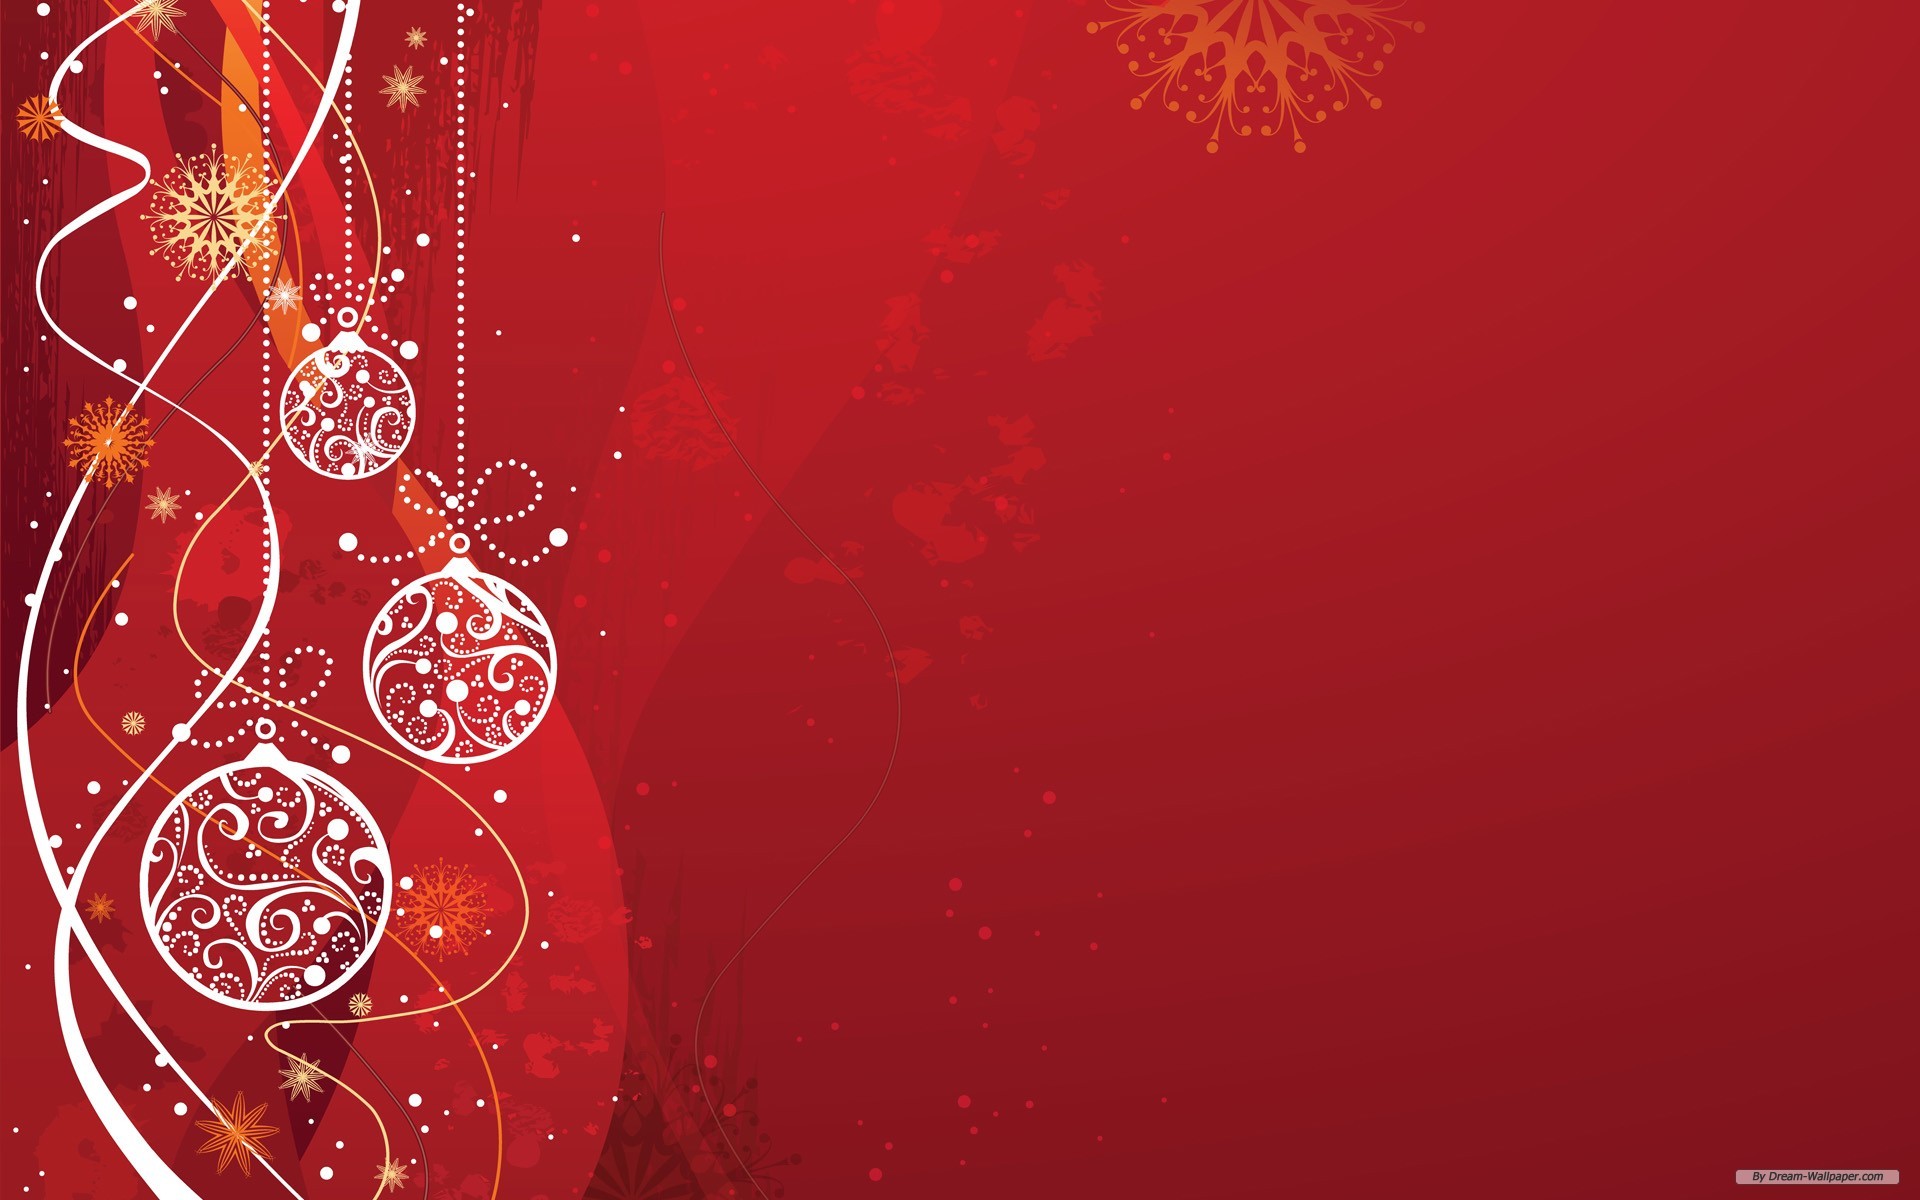 1920x1200 holiday background - Google Search